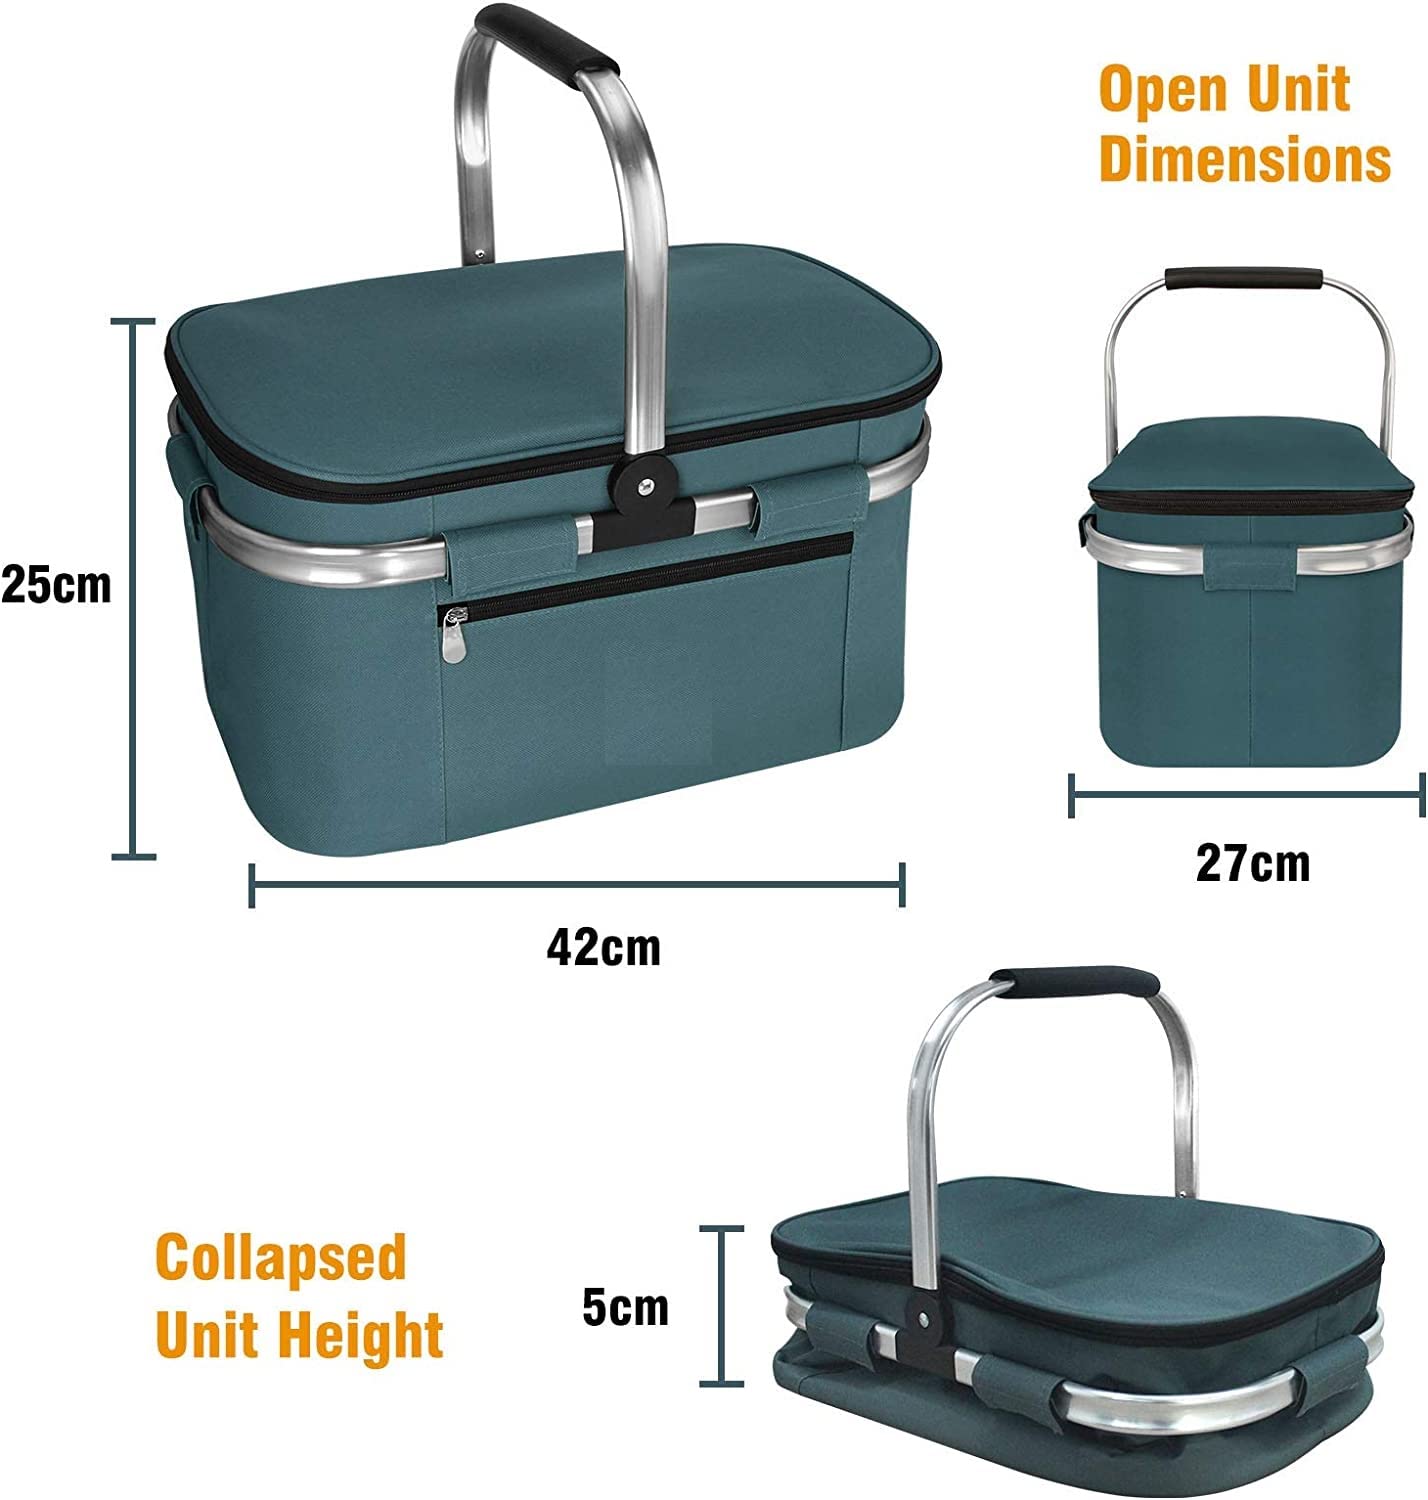 Foldable Insulated Picnic Basket 25L Extra Large Insulated Bag for Picnic, Food Delivery, Take Outs, Grocery Shopping, and as Cooler Bag. Foldable Design